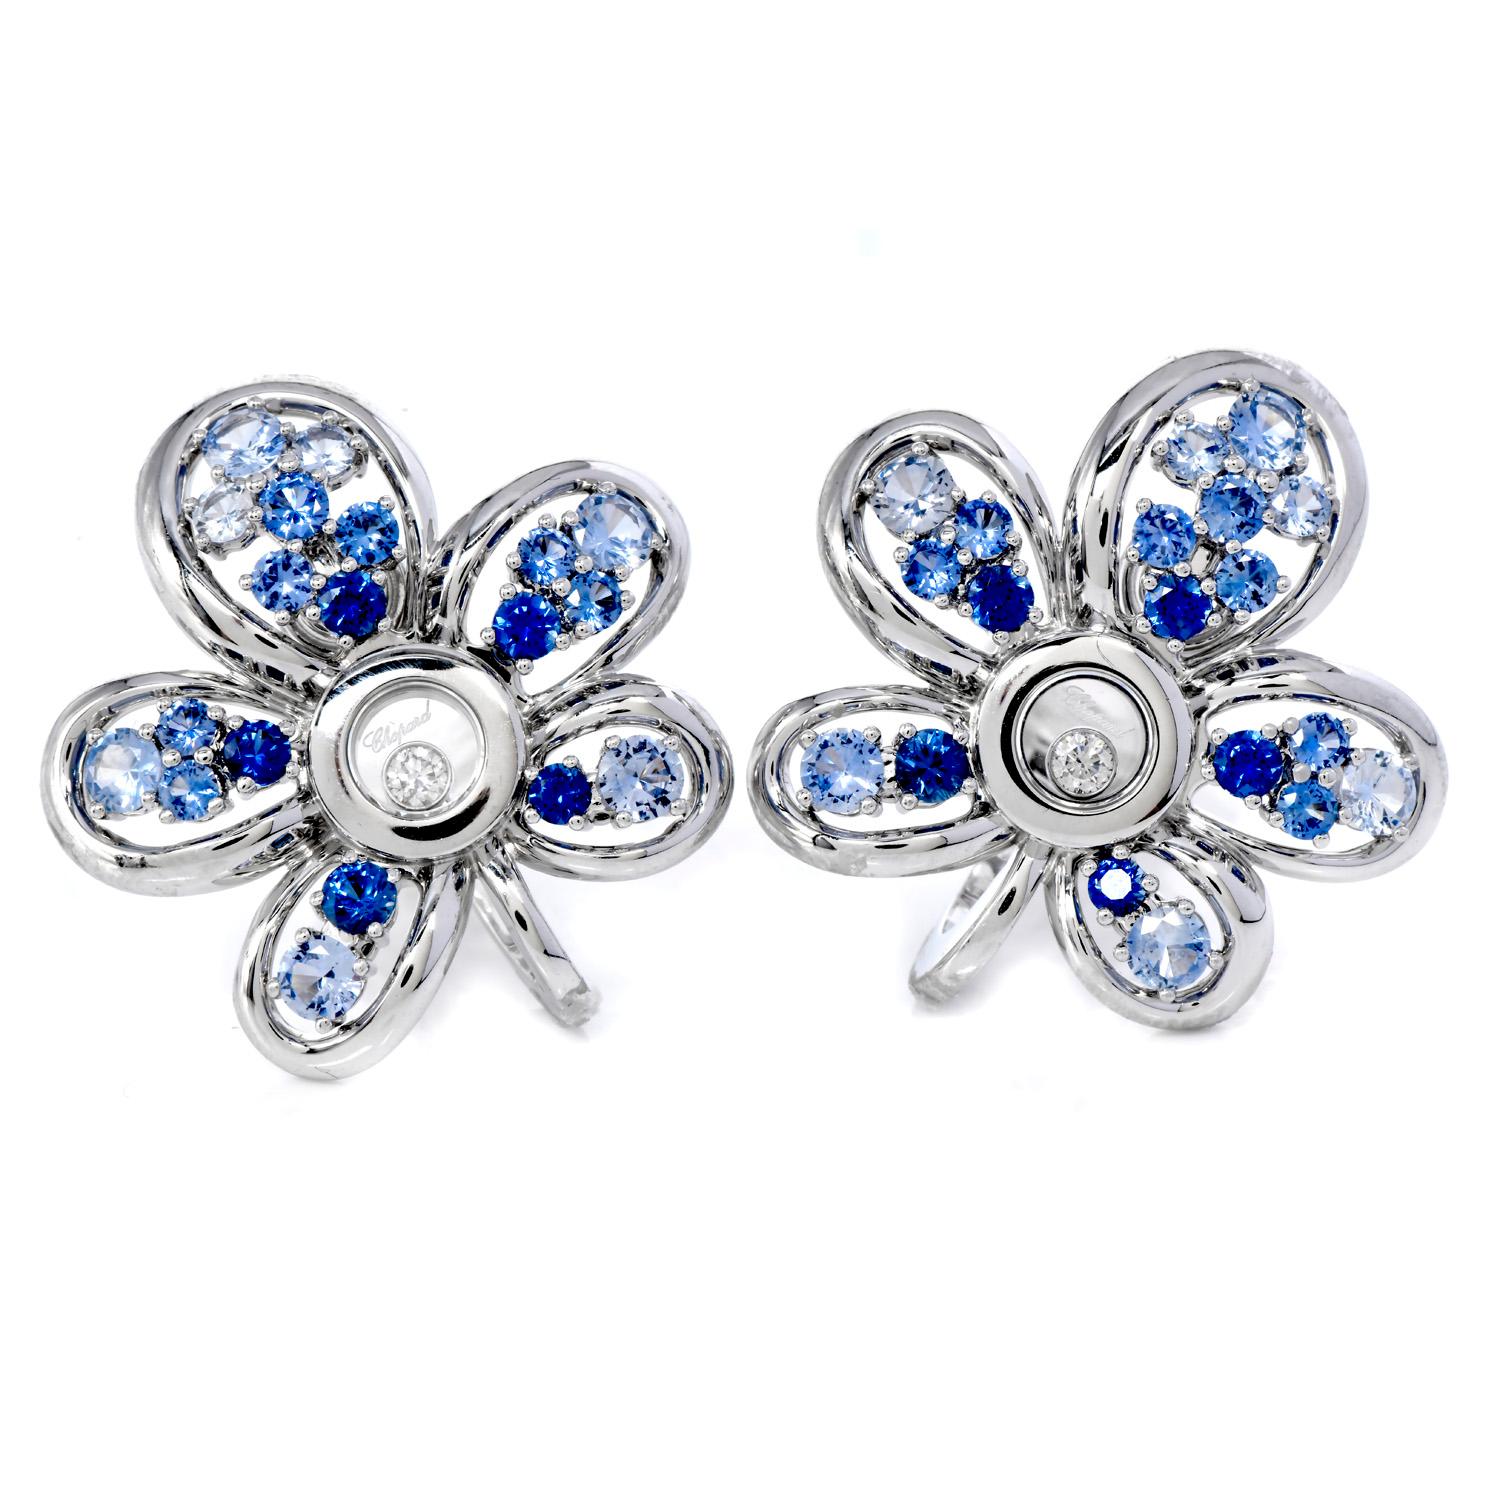 The pendant & earrings are finely crafted from luxurious 18K white gold.

This set features Light blue to Deep Blue Color Genuine Sapphires, round-cut, prong-set, weighing 5.40 carats,

The (3) Round cut, Bezel Set, Floating Diamonds weight approx.